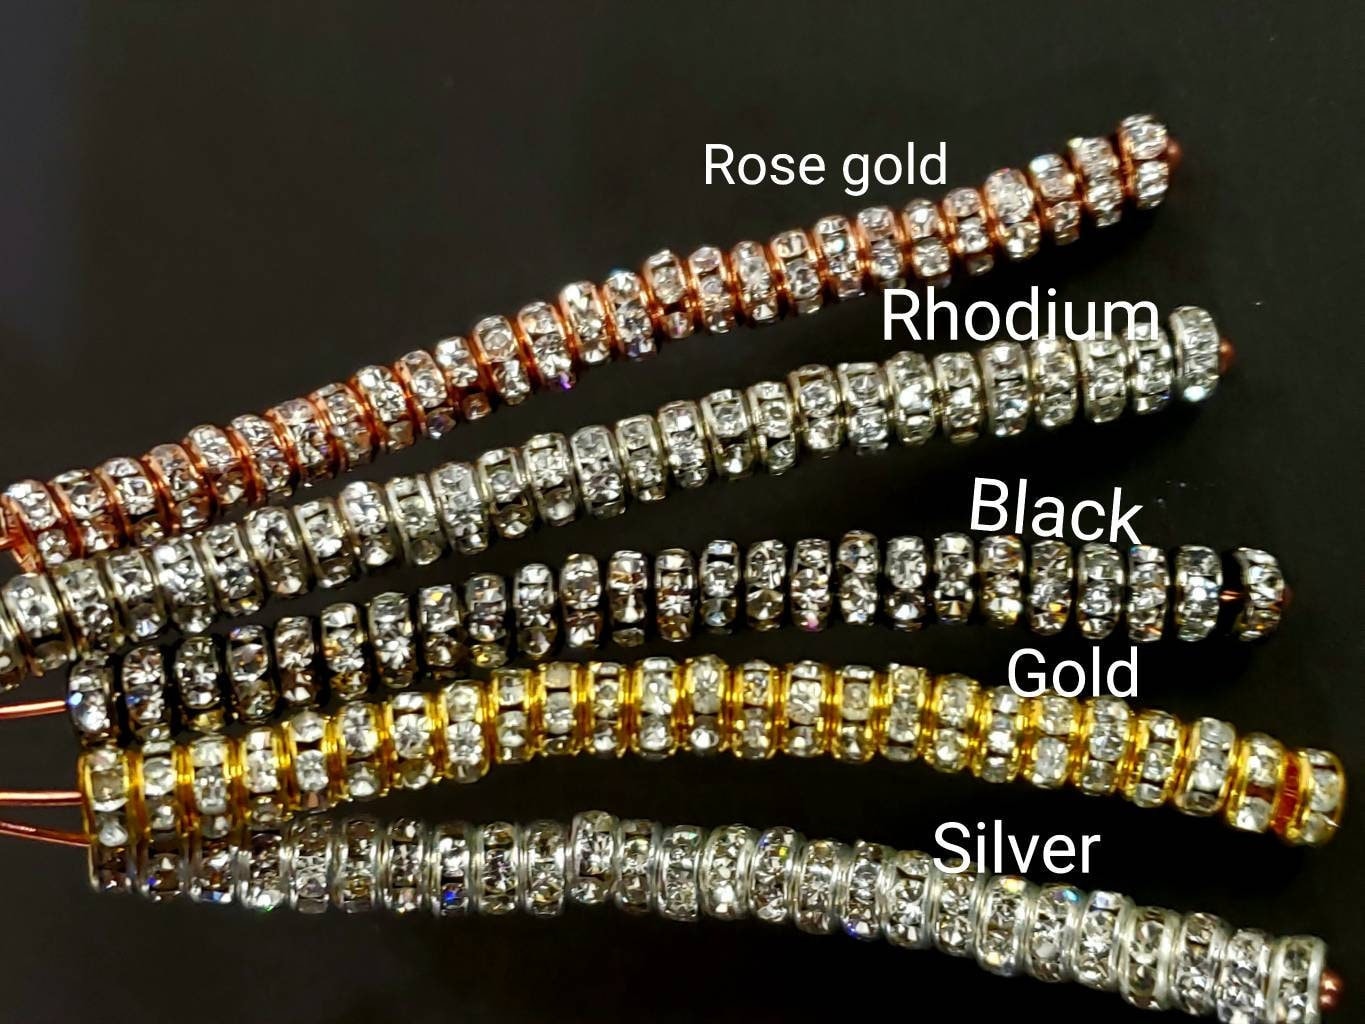 50 pcs 4mm Rhinestone Roundel Crystal bling sparkly Spacer bead for jewelry making supplies.Silver, gold, Rhodium , black 4 colors,